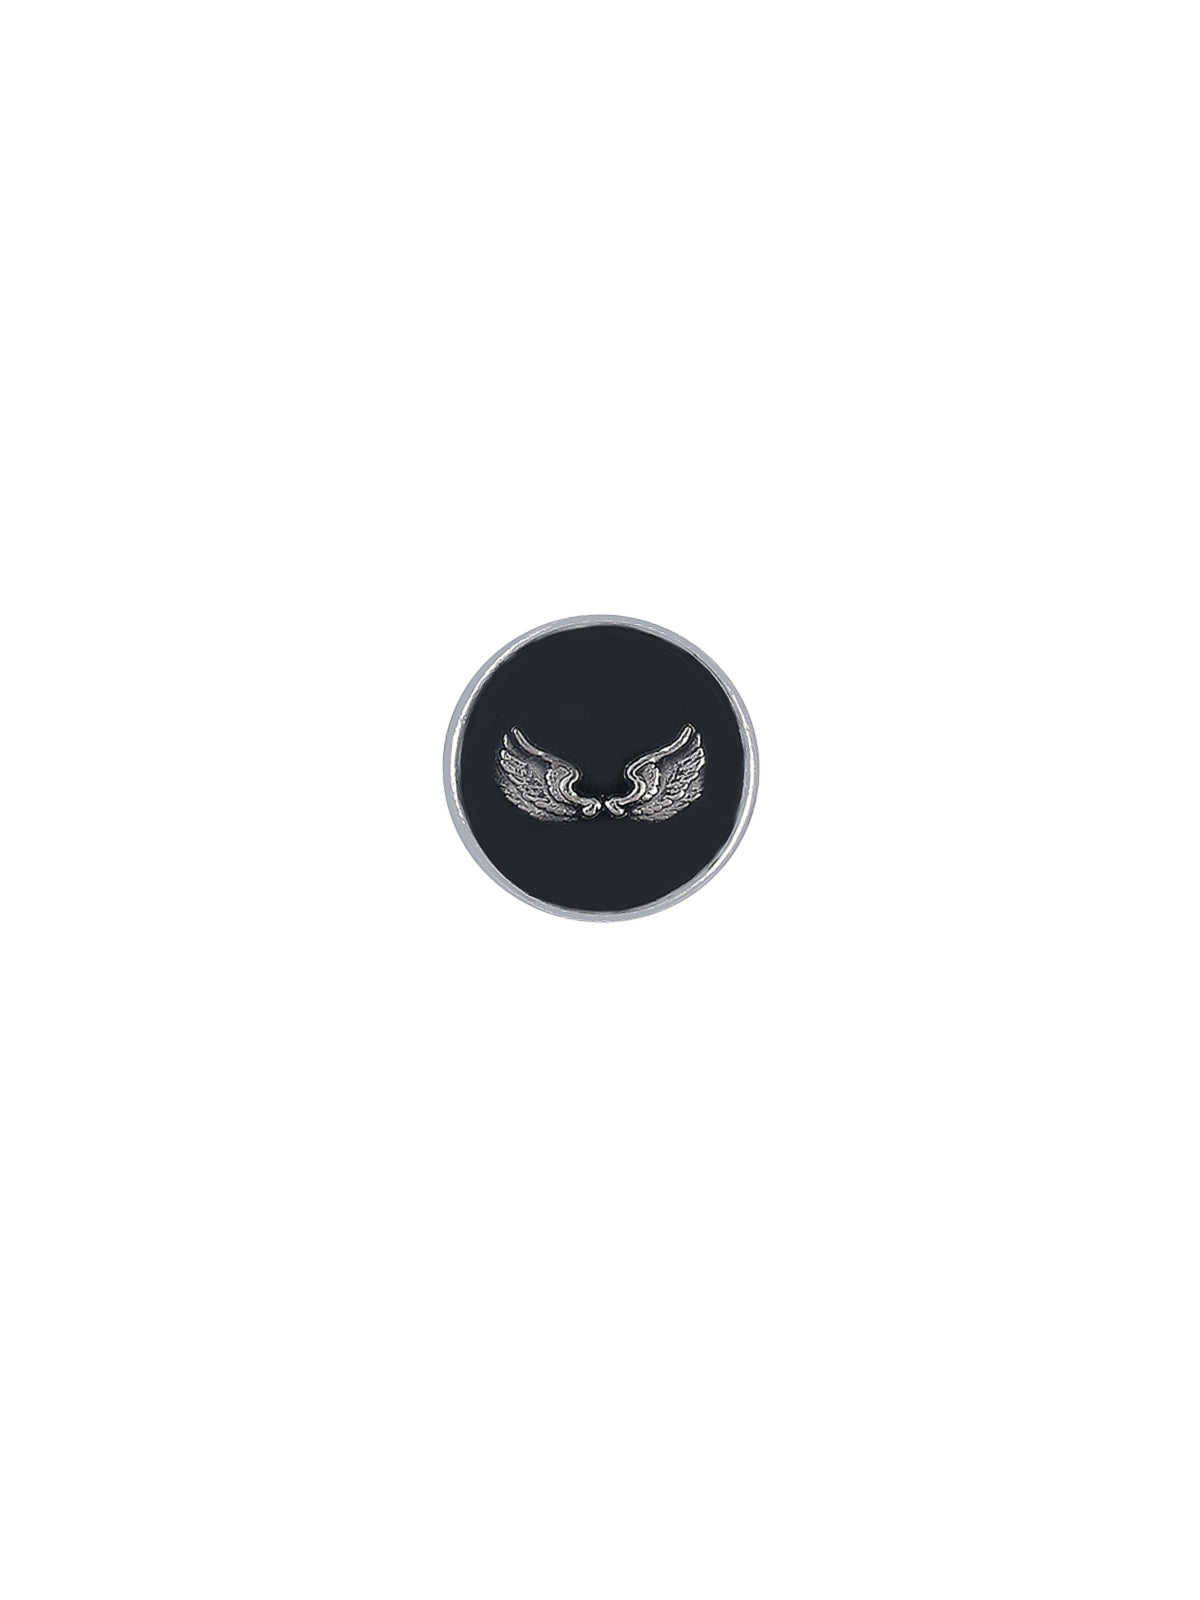 Classy Silver with Black Lamination Shank Metal Button